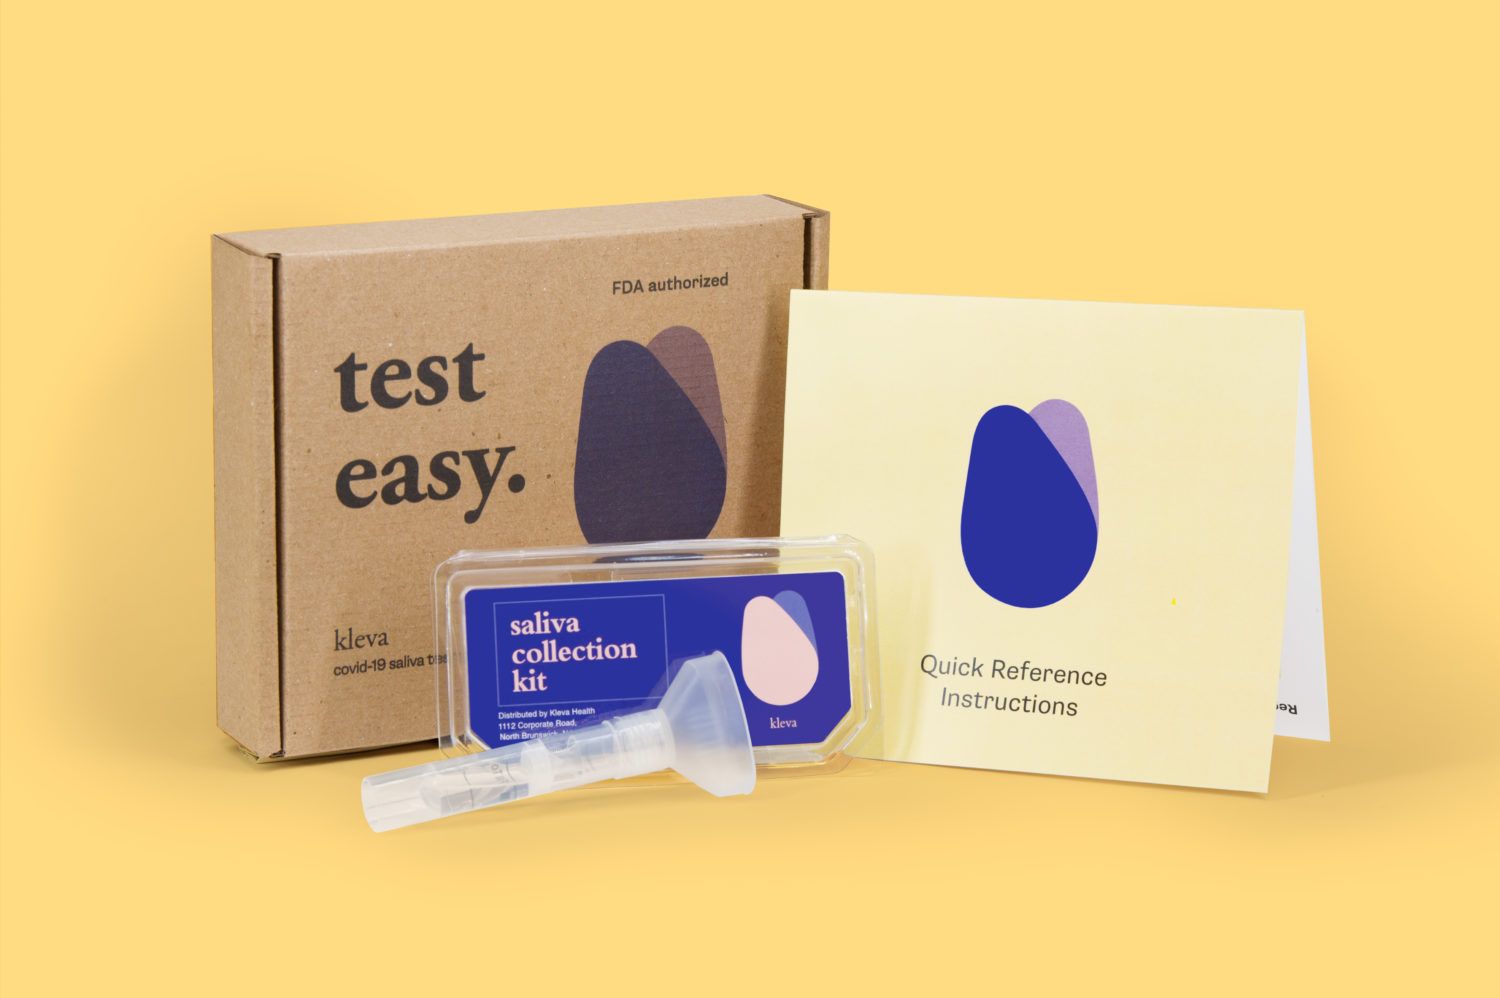 Kleva Health Launches FDA Authorized ‘Saliva At-Home COVID-19 Test Kit’ With $1.8M in Seed Fundraising